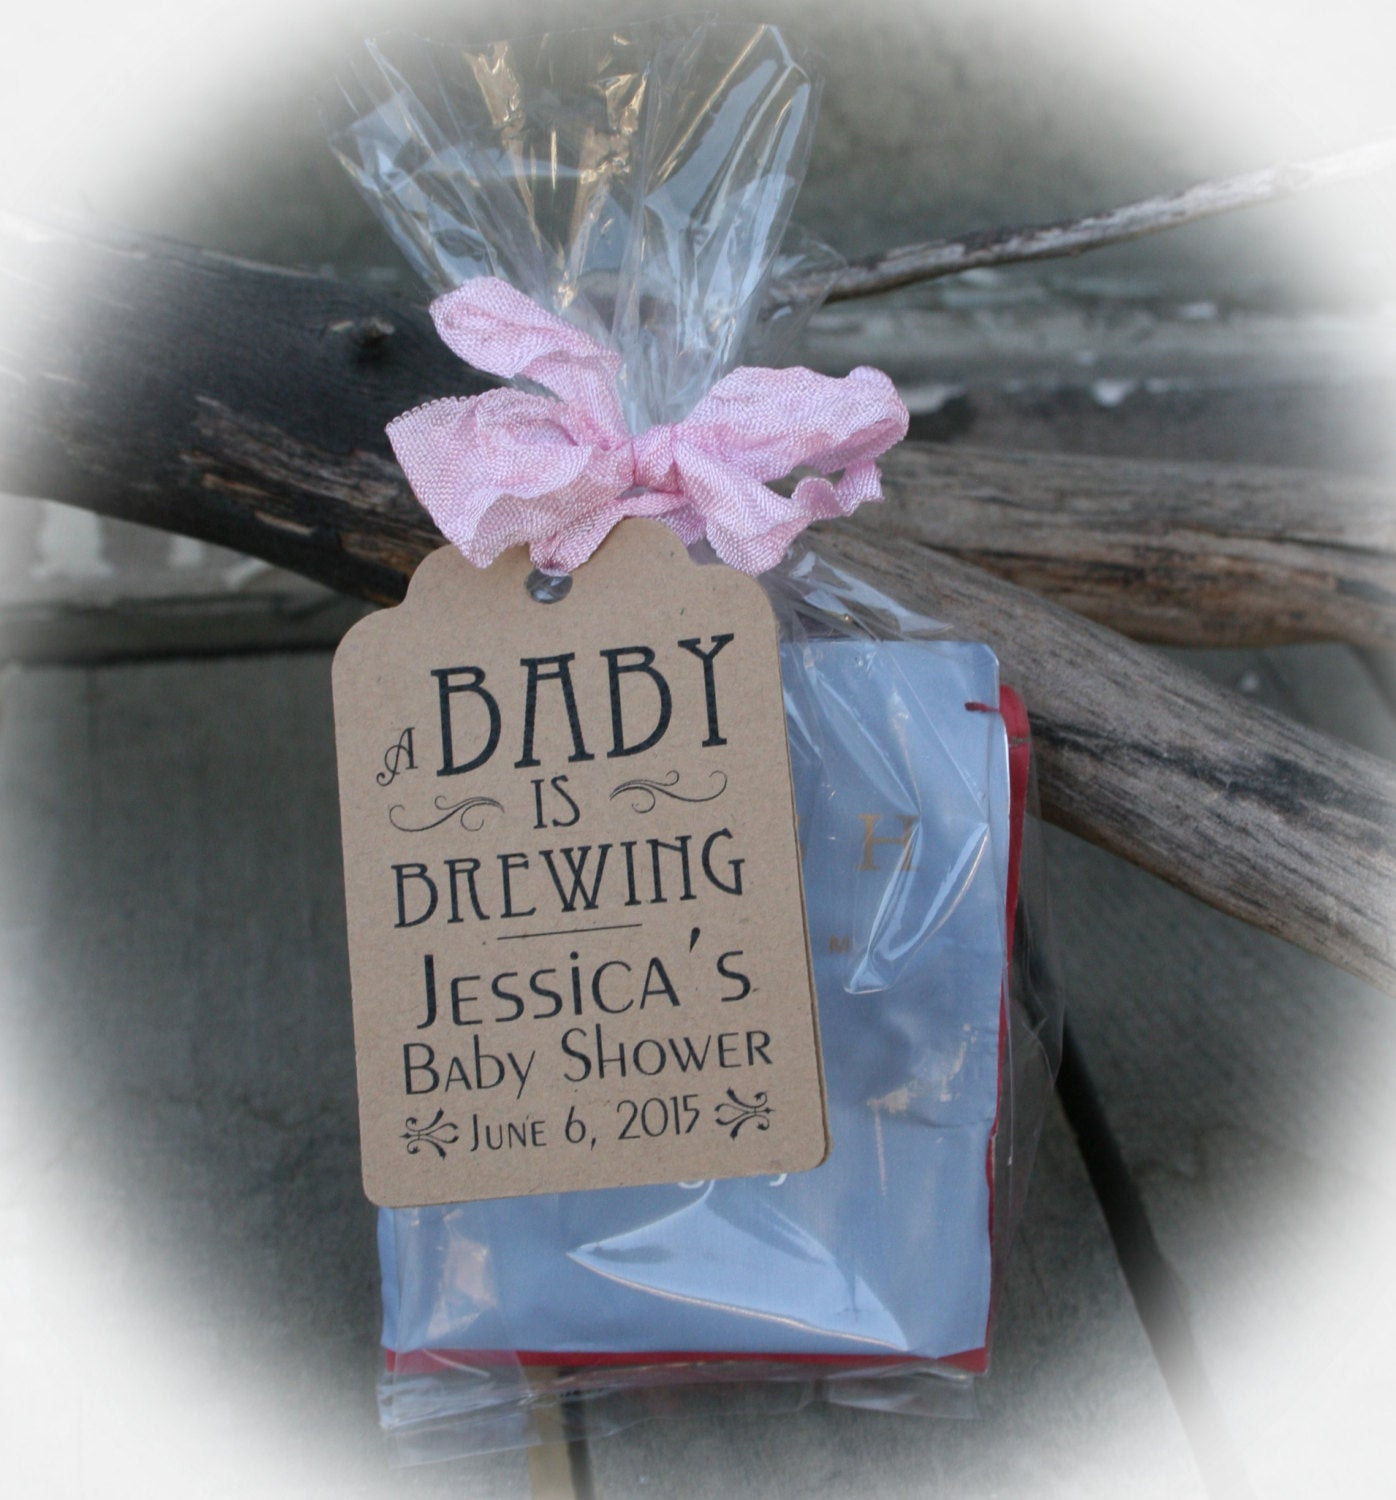 DIY Party Favors For Baby Shower
 A BABY is Brewing Baby Shower Favors DIY Bags Favor Tags